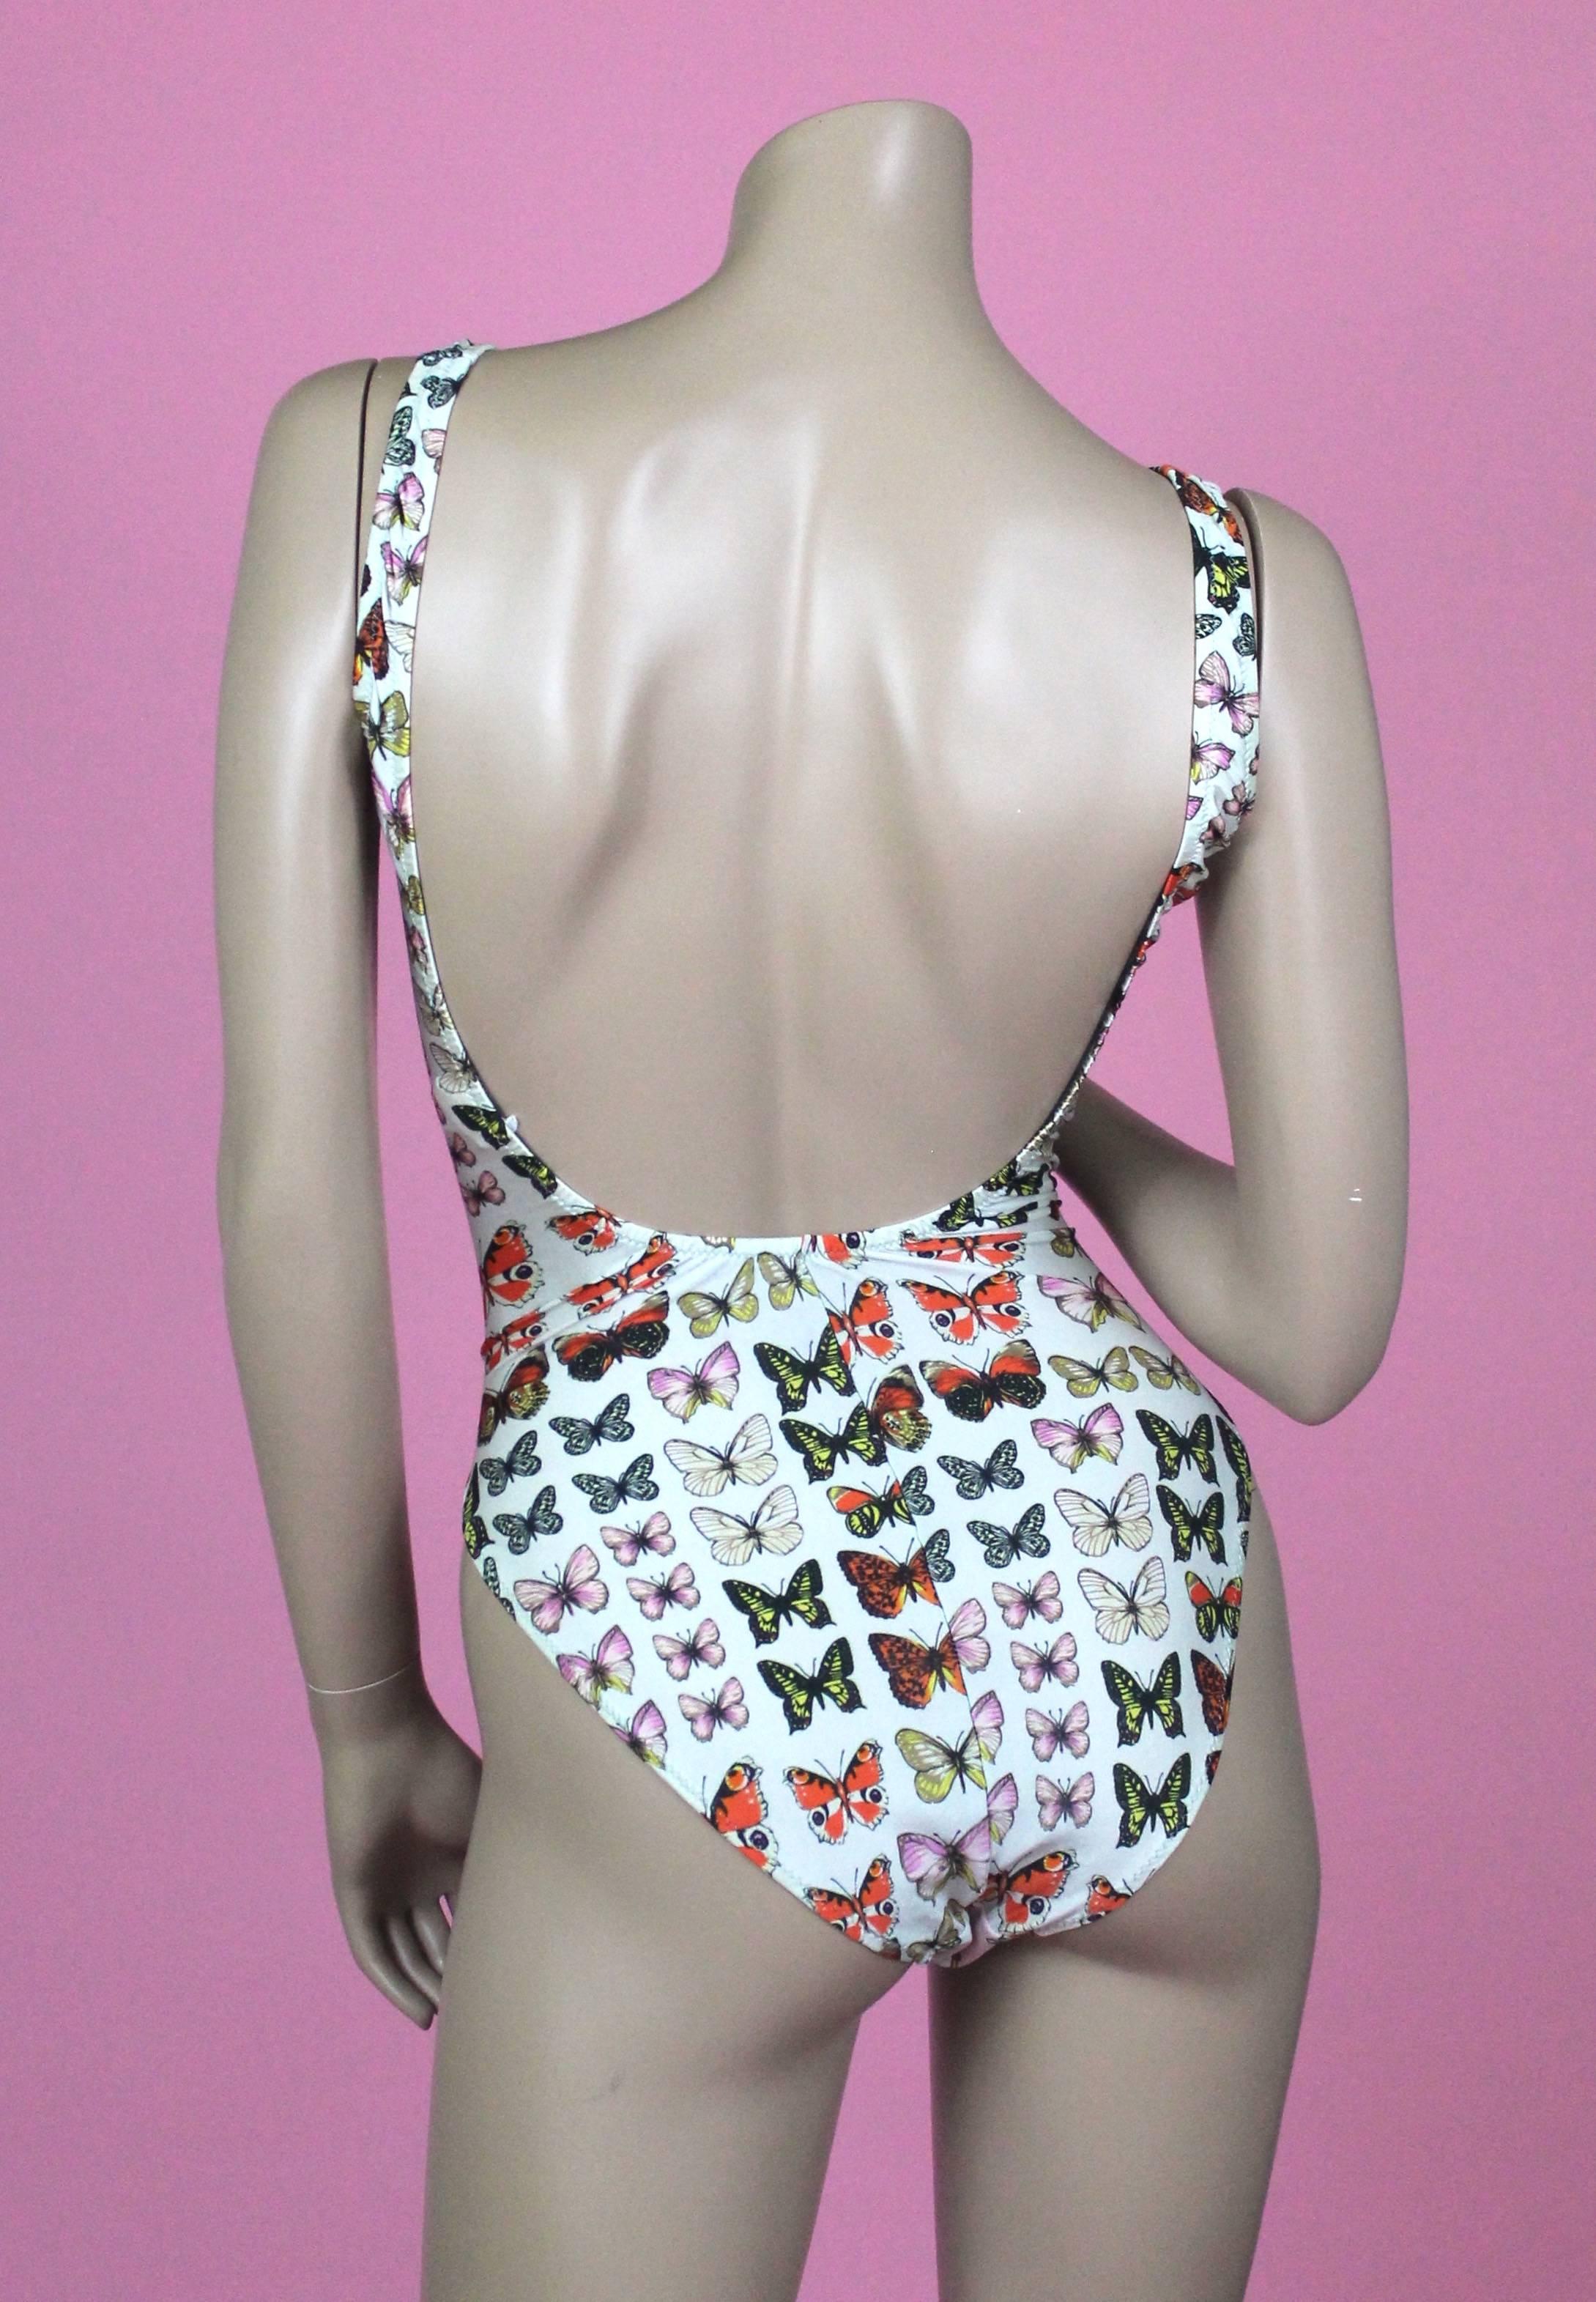 Versace Mare Butterfly Bodysuit
-From Spring Summer 1995 this Versace Mare swim suit features iconic butterfly print
-Made of stretchy material and perfect for the beach or for a causal look with jeans
-Butterfly print has been reissued by Donatella